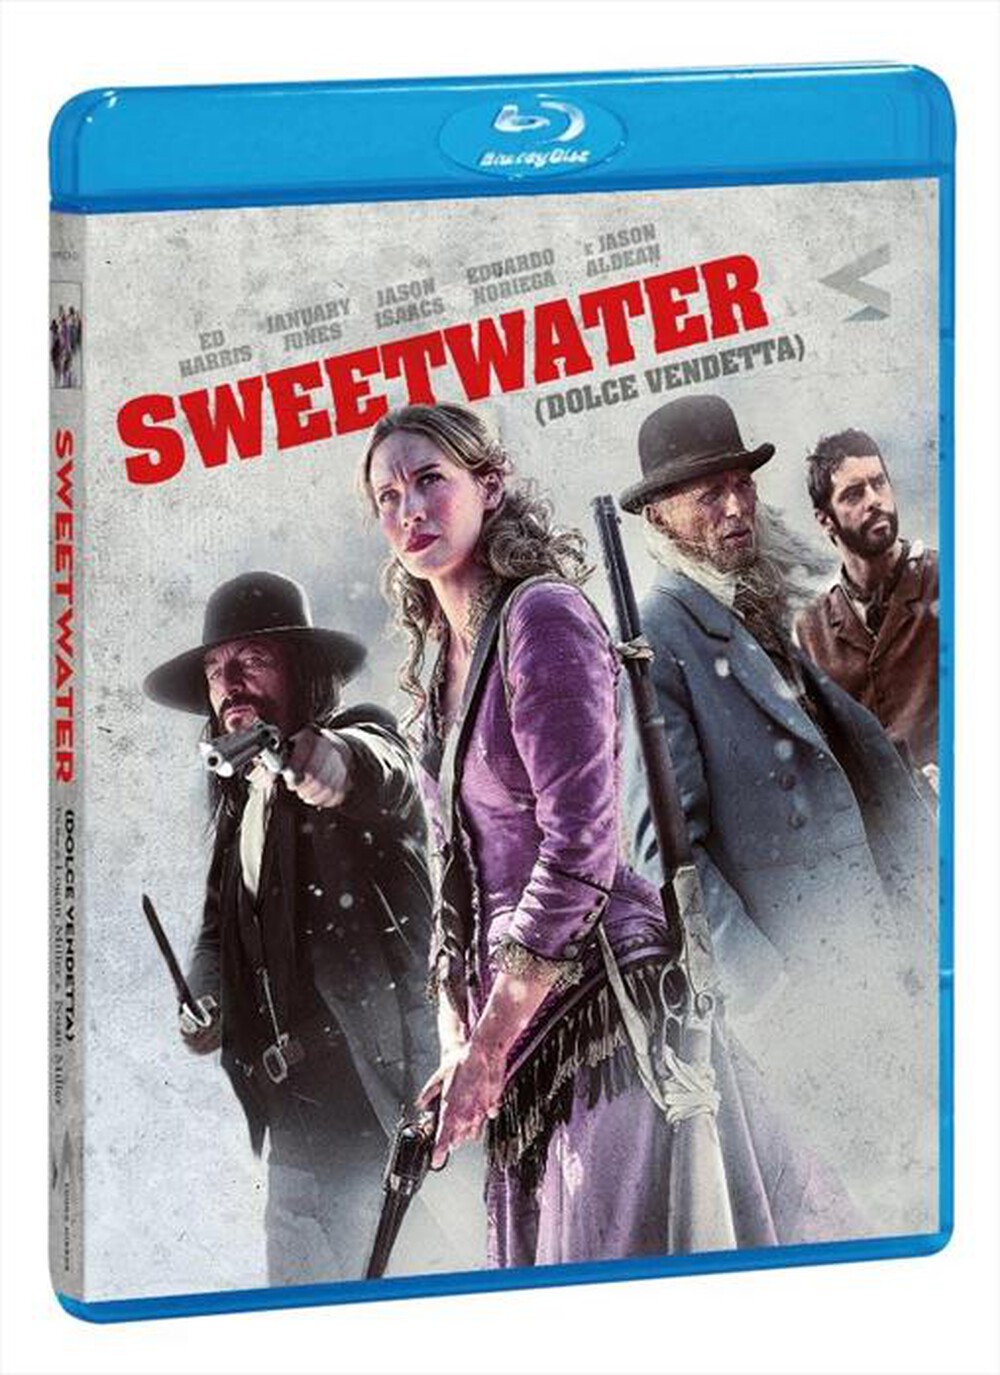 "EAGLE PICTURES - Sweetwater - Dolce Vendetta"